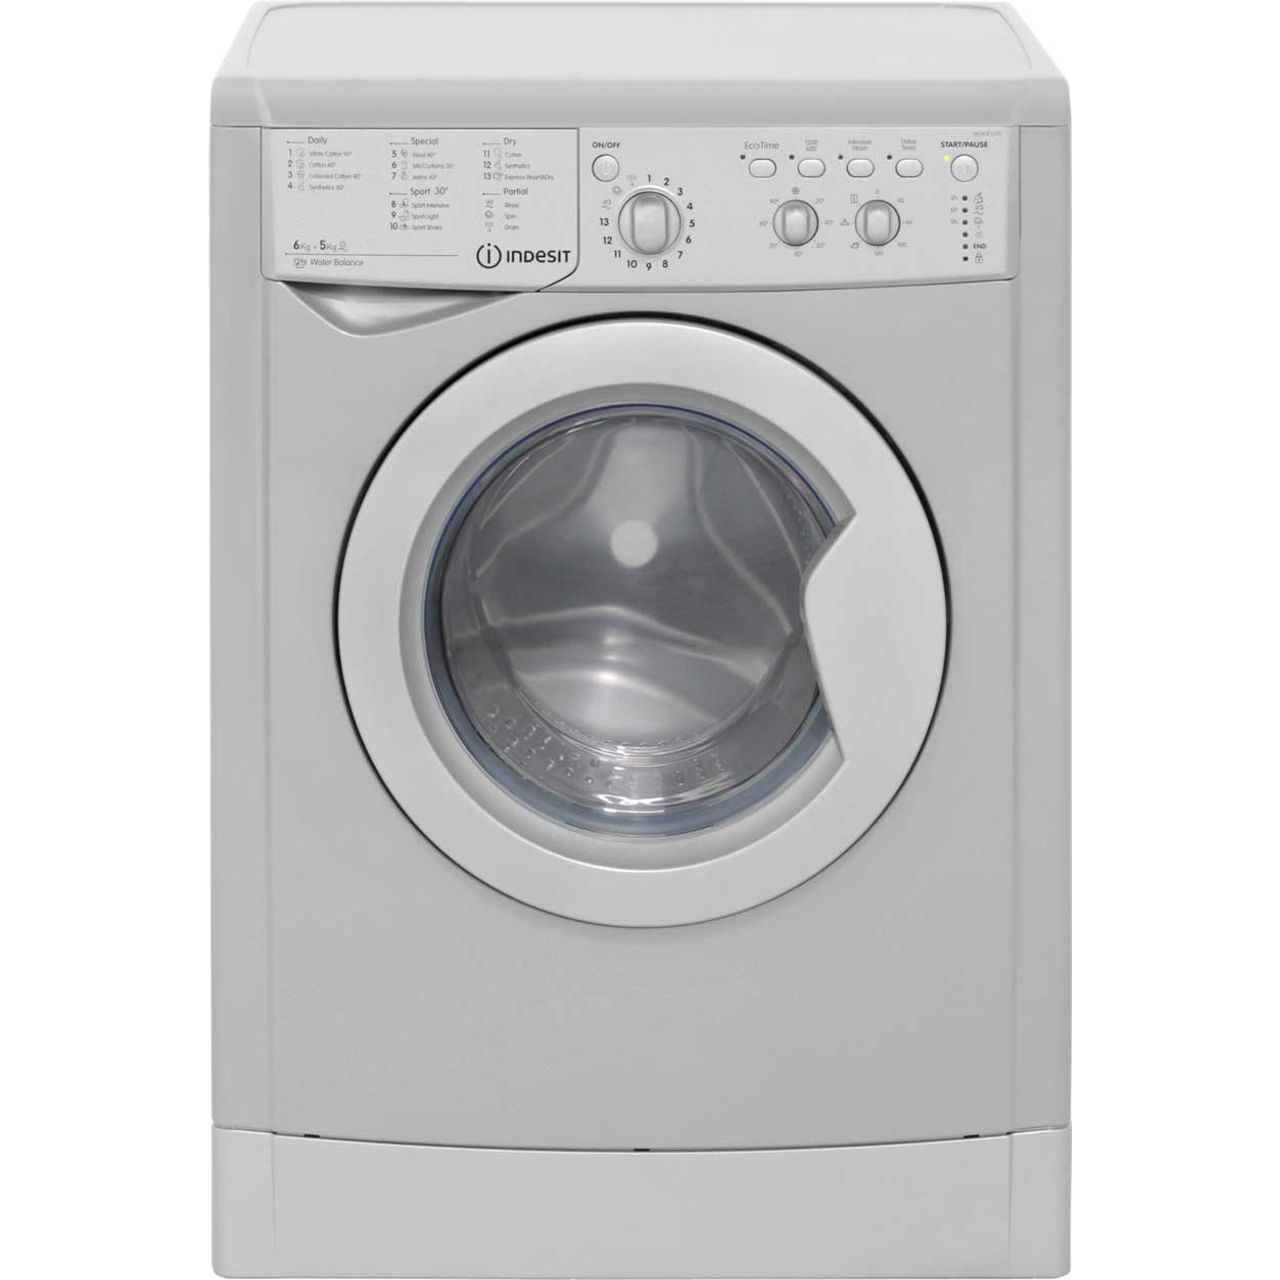 Indesit Eco Time IWDC6125S 6Kg / 5Kg Washer Dryer with 1200 rpm Review